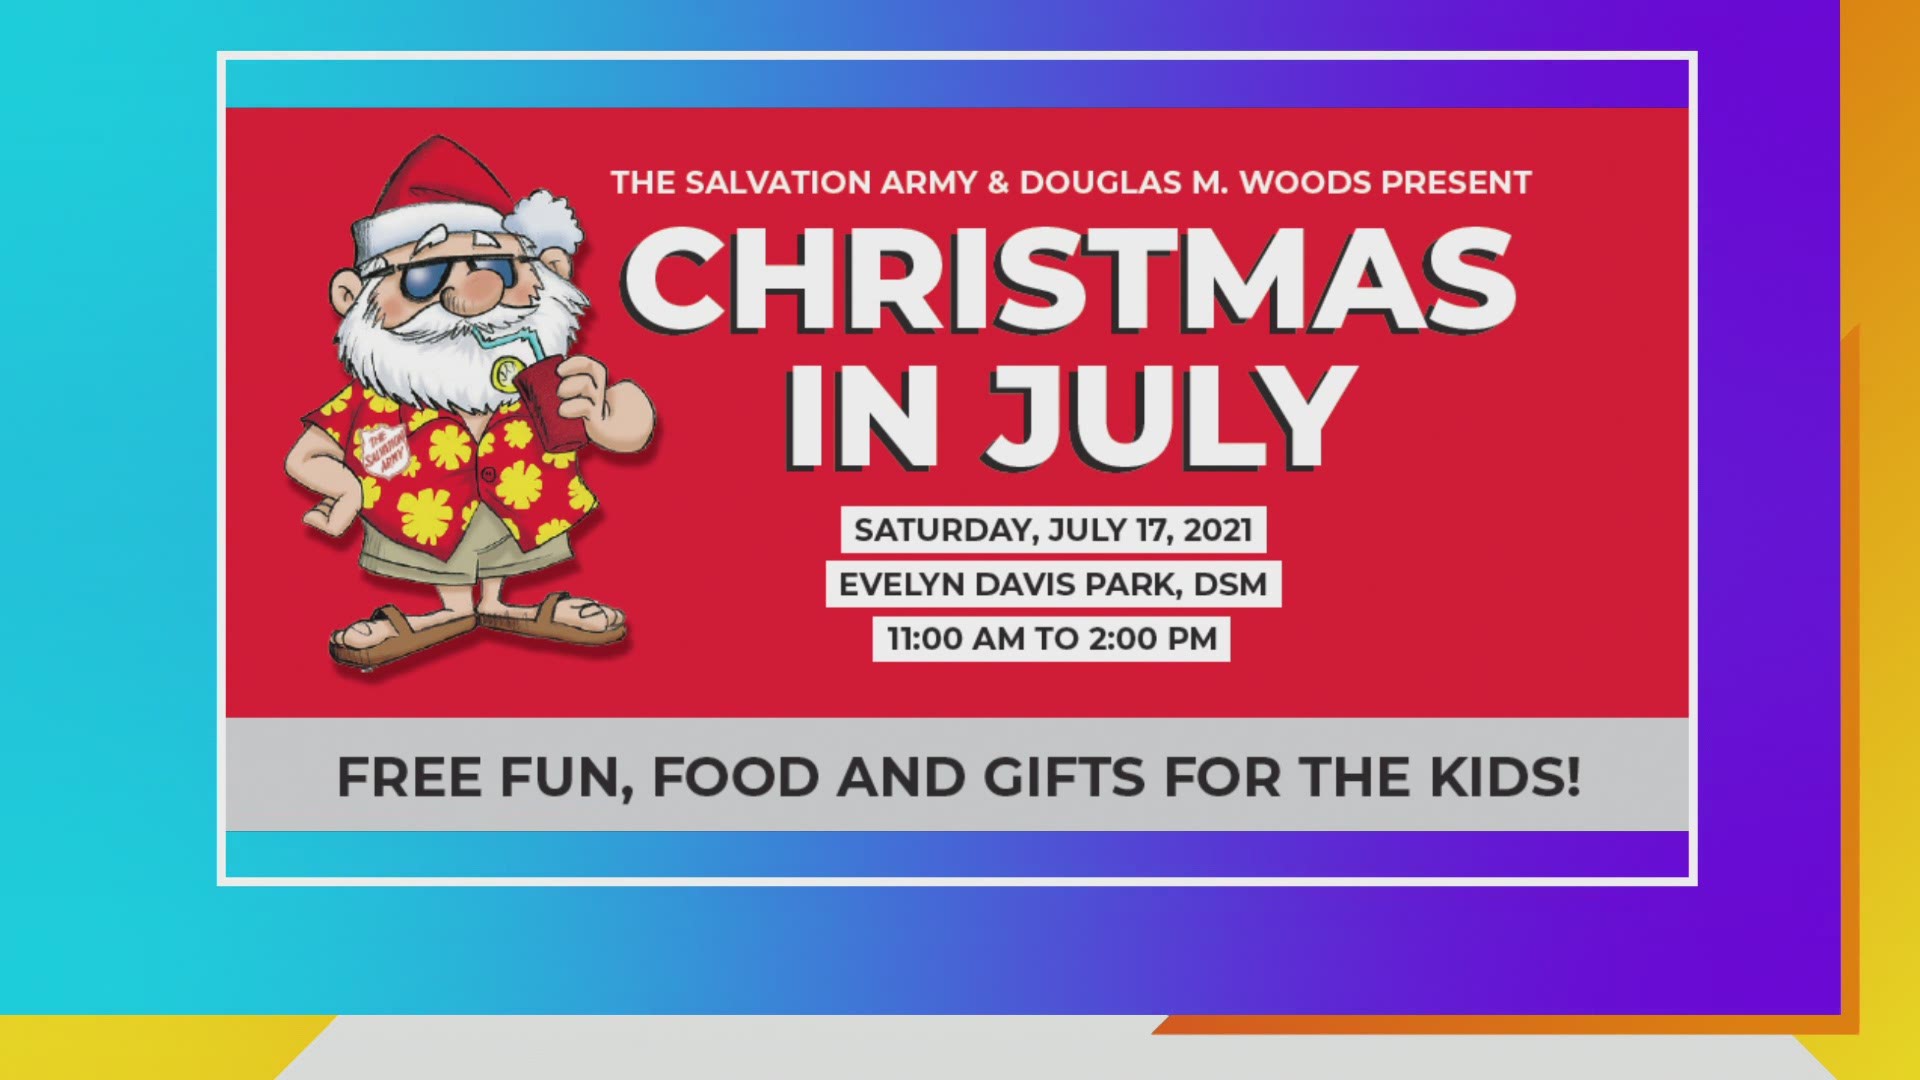 The Salvation Army is celebrating Christmas in July THIS SATURDAY the 17th with giveaways, food, and Santa on hand with toys for kids and baby reindeer!